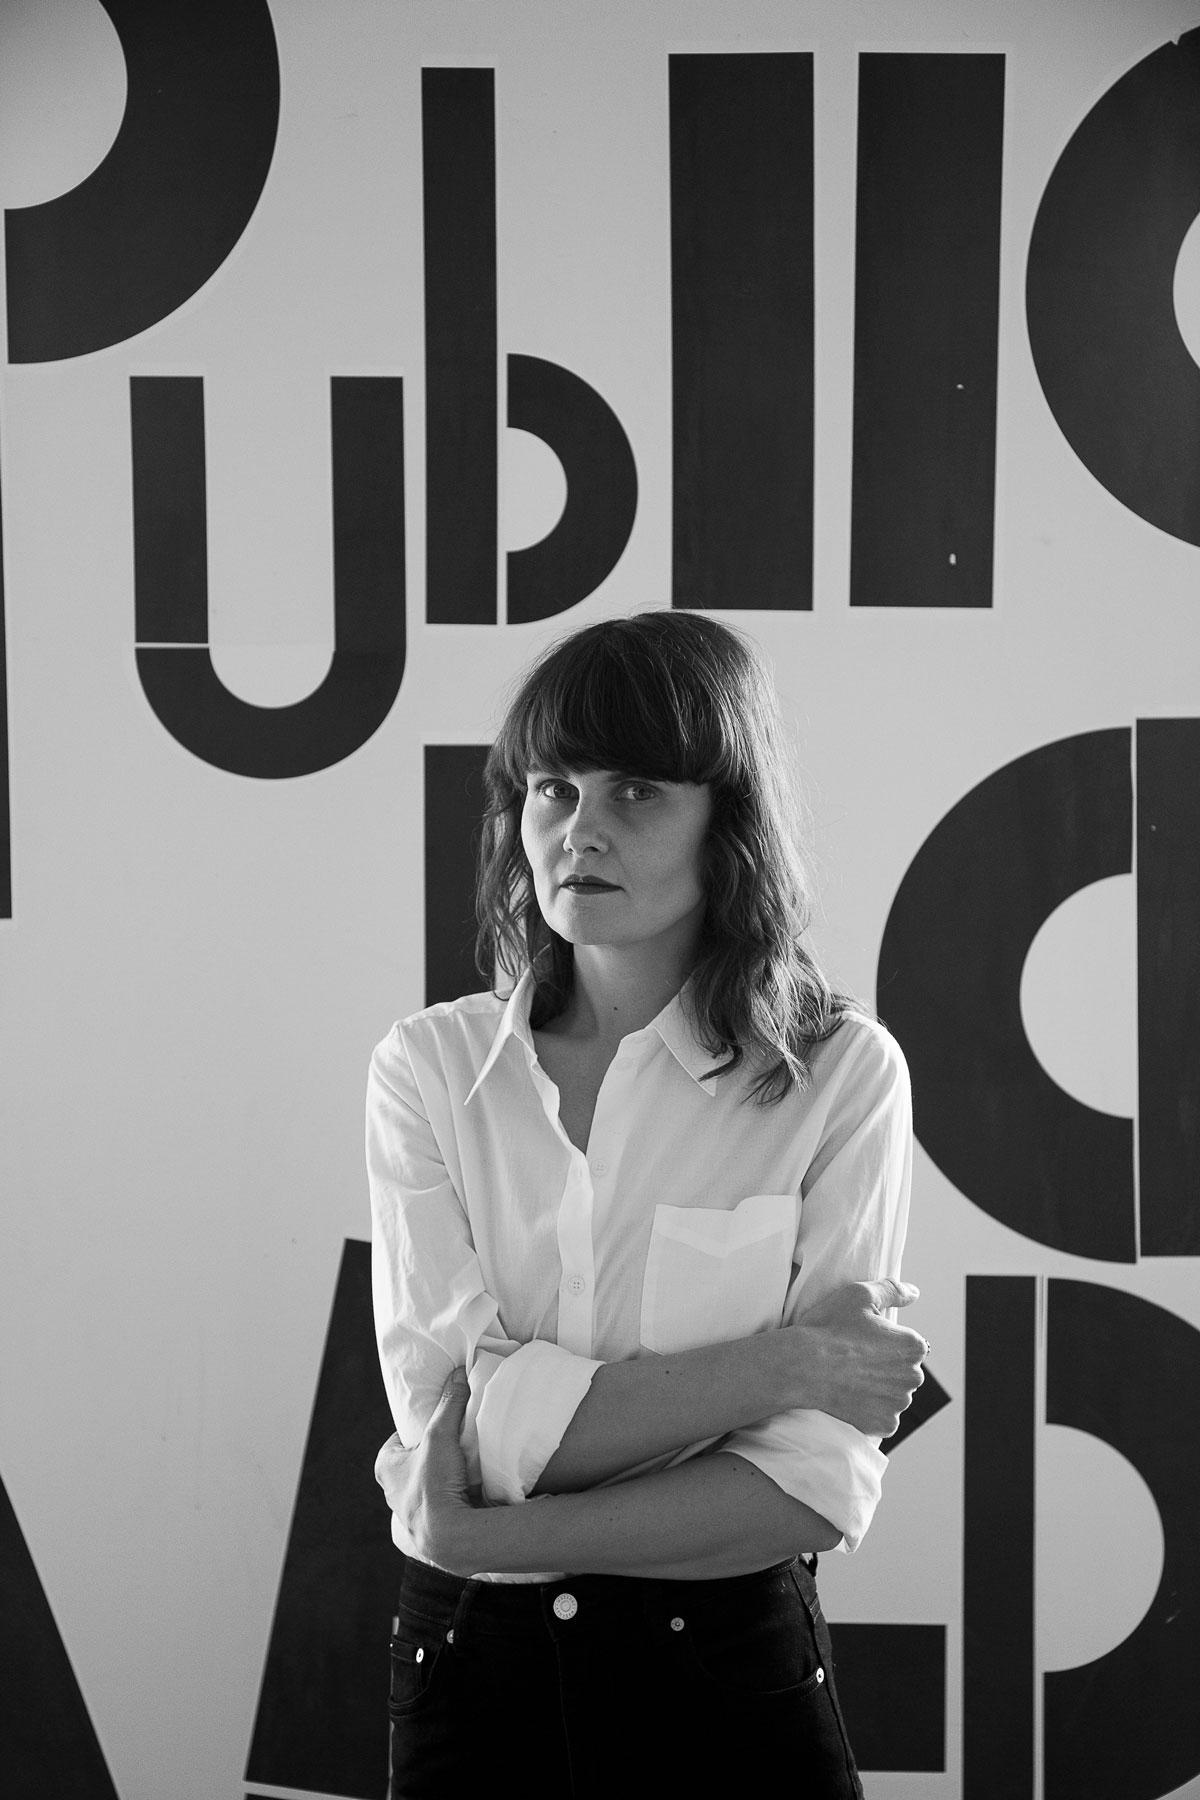 A black and white photo, Eliisa directly looking into the camera with a slightly serious expression on their face, a phrase 'Publics is a verb' by Kathrin Böhm is pasted on the wall behind